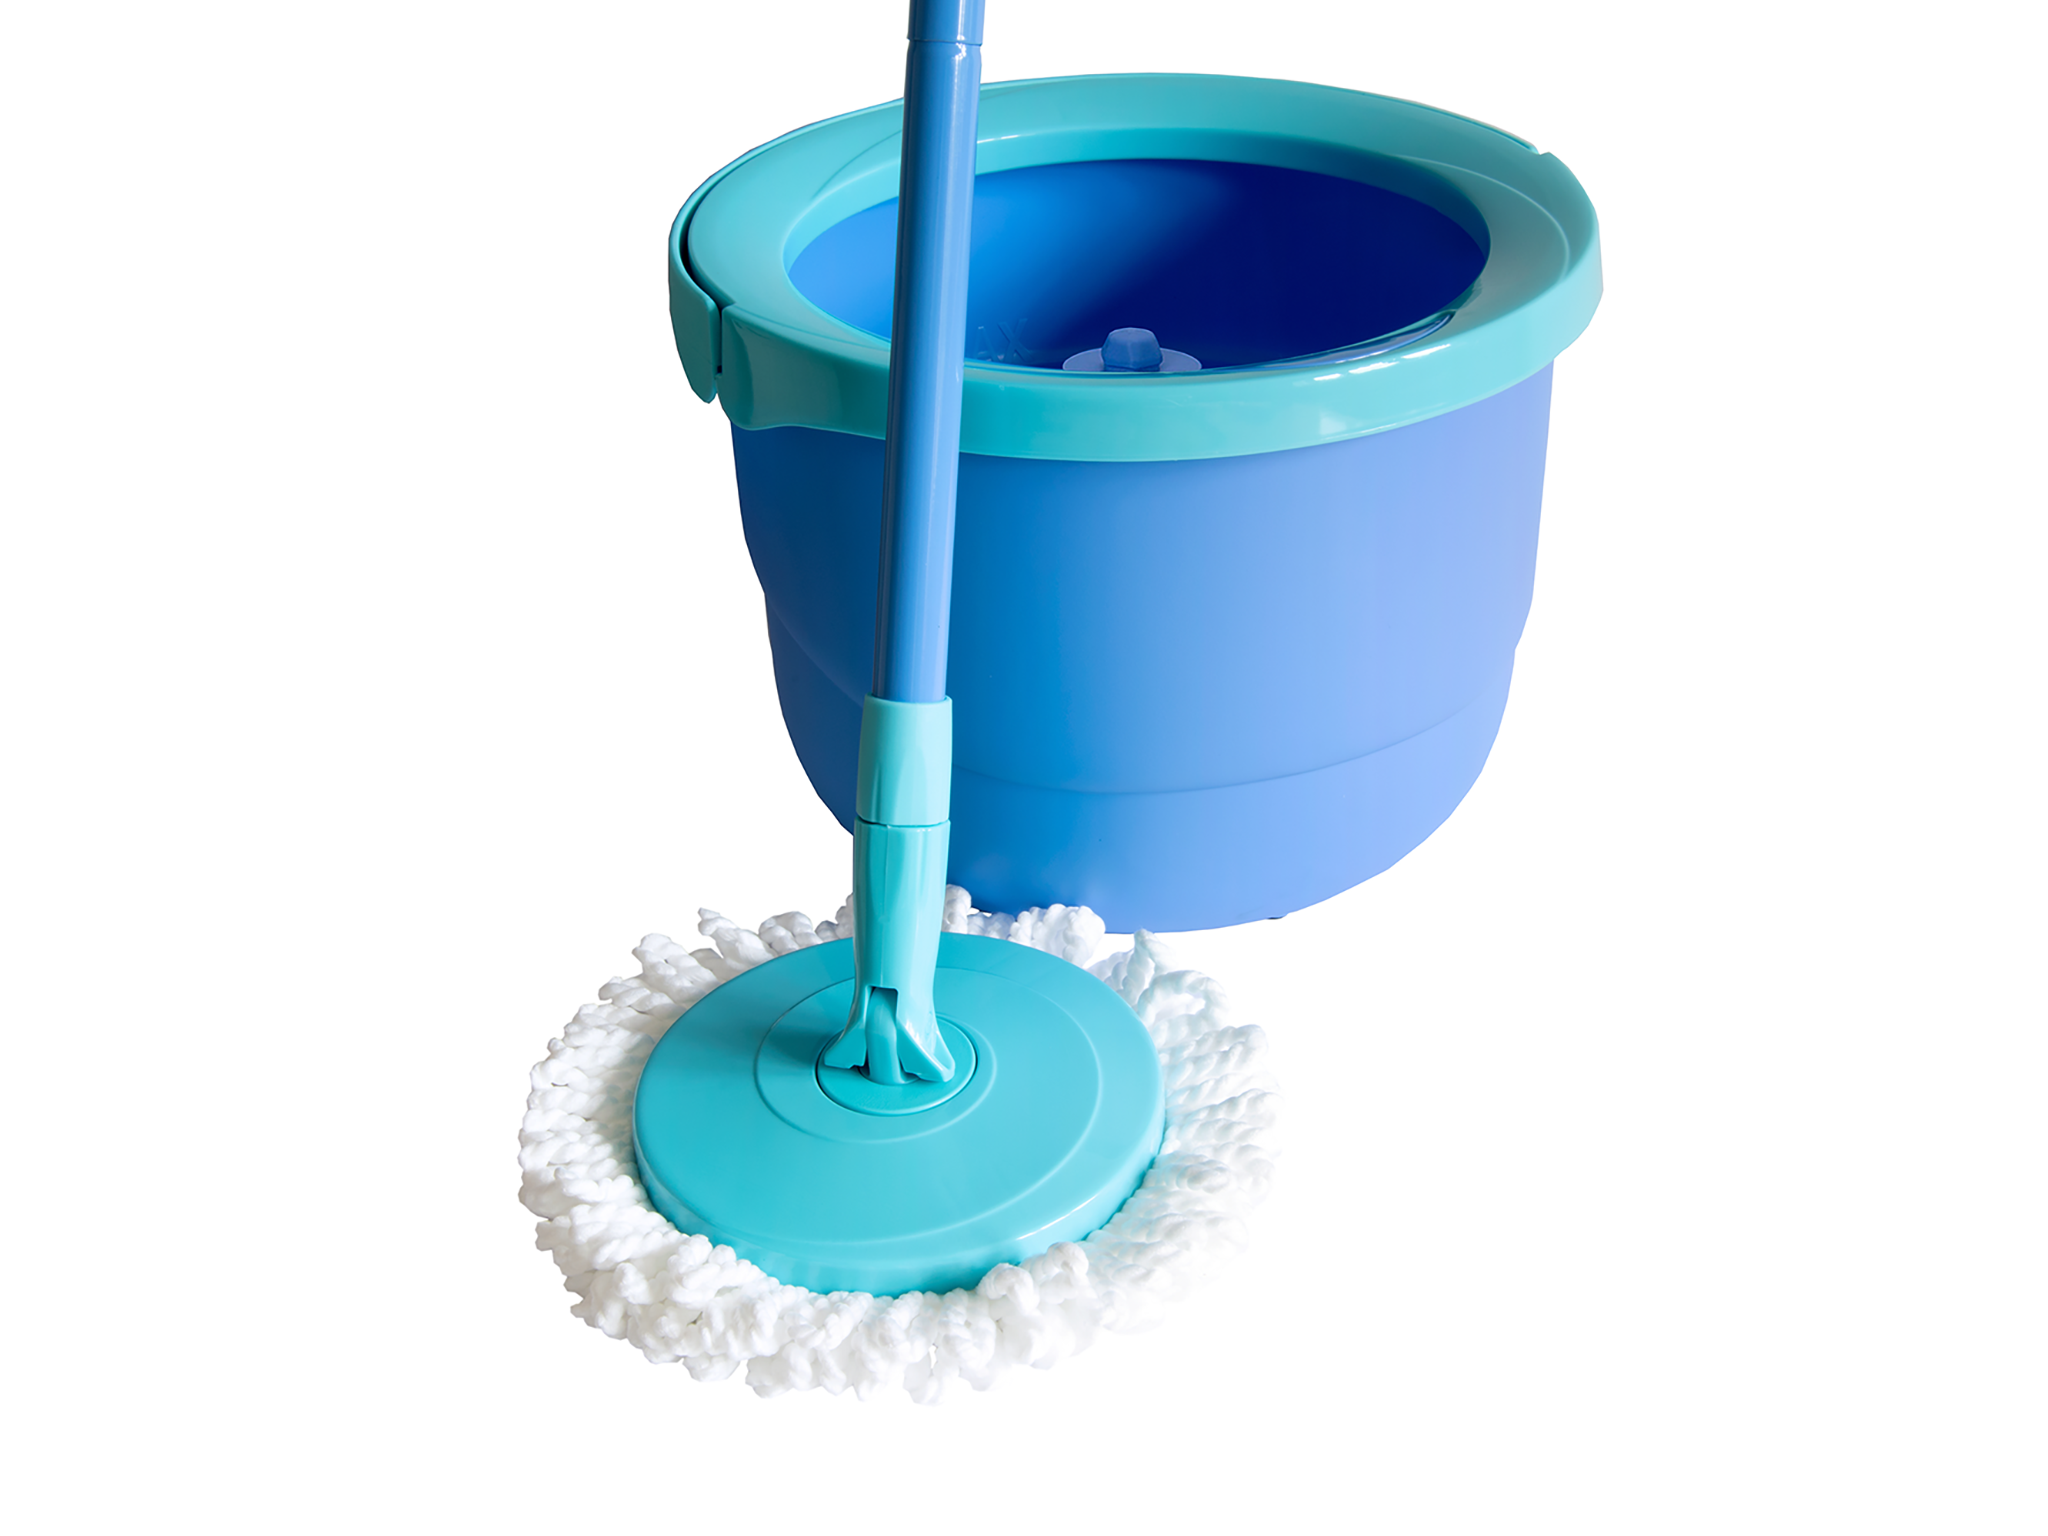 Spontex full action system mop and bucket